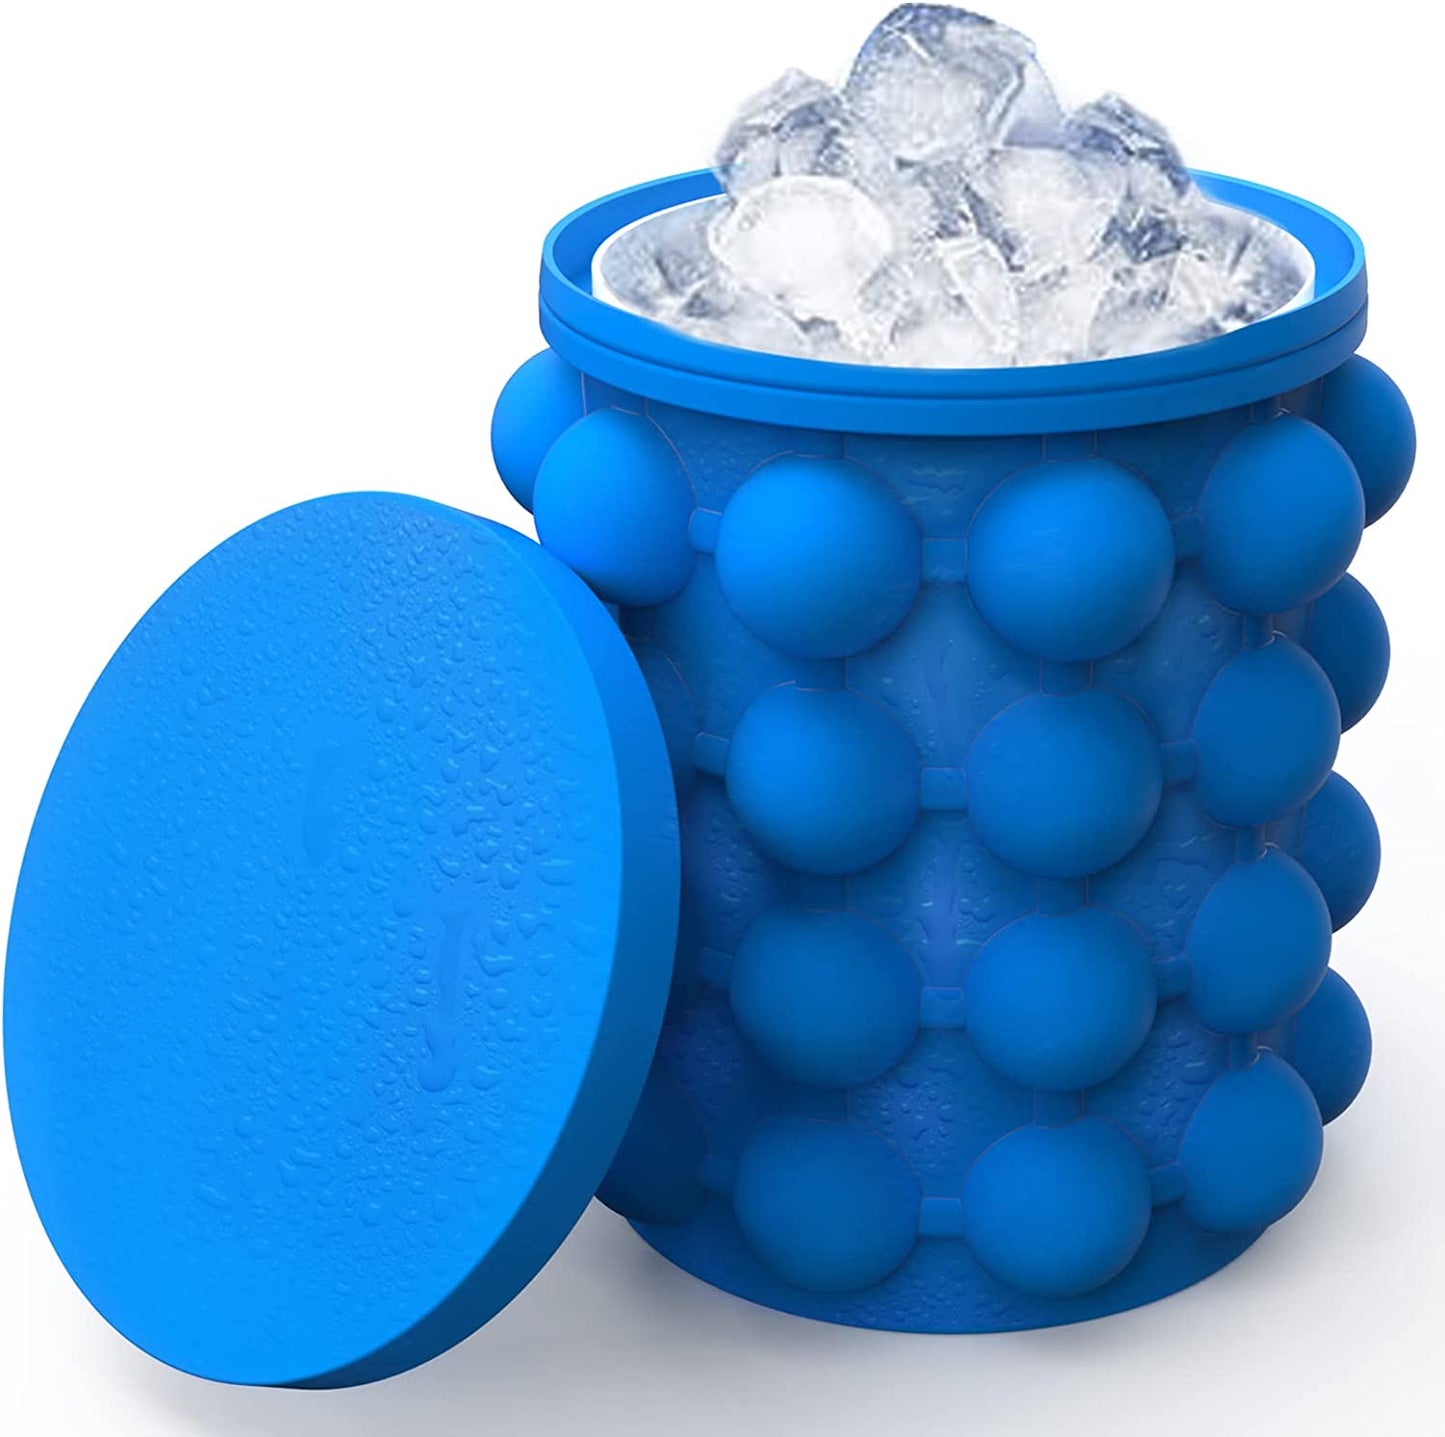 Ice Cube Mold Ice Trays, Large Silicone Ice Bucket, (2 in 1) Ice Cube Maker, Round,Portable (Dark Blue)